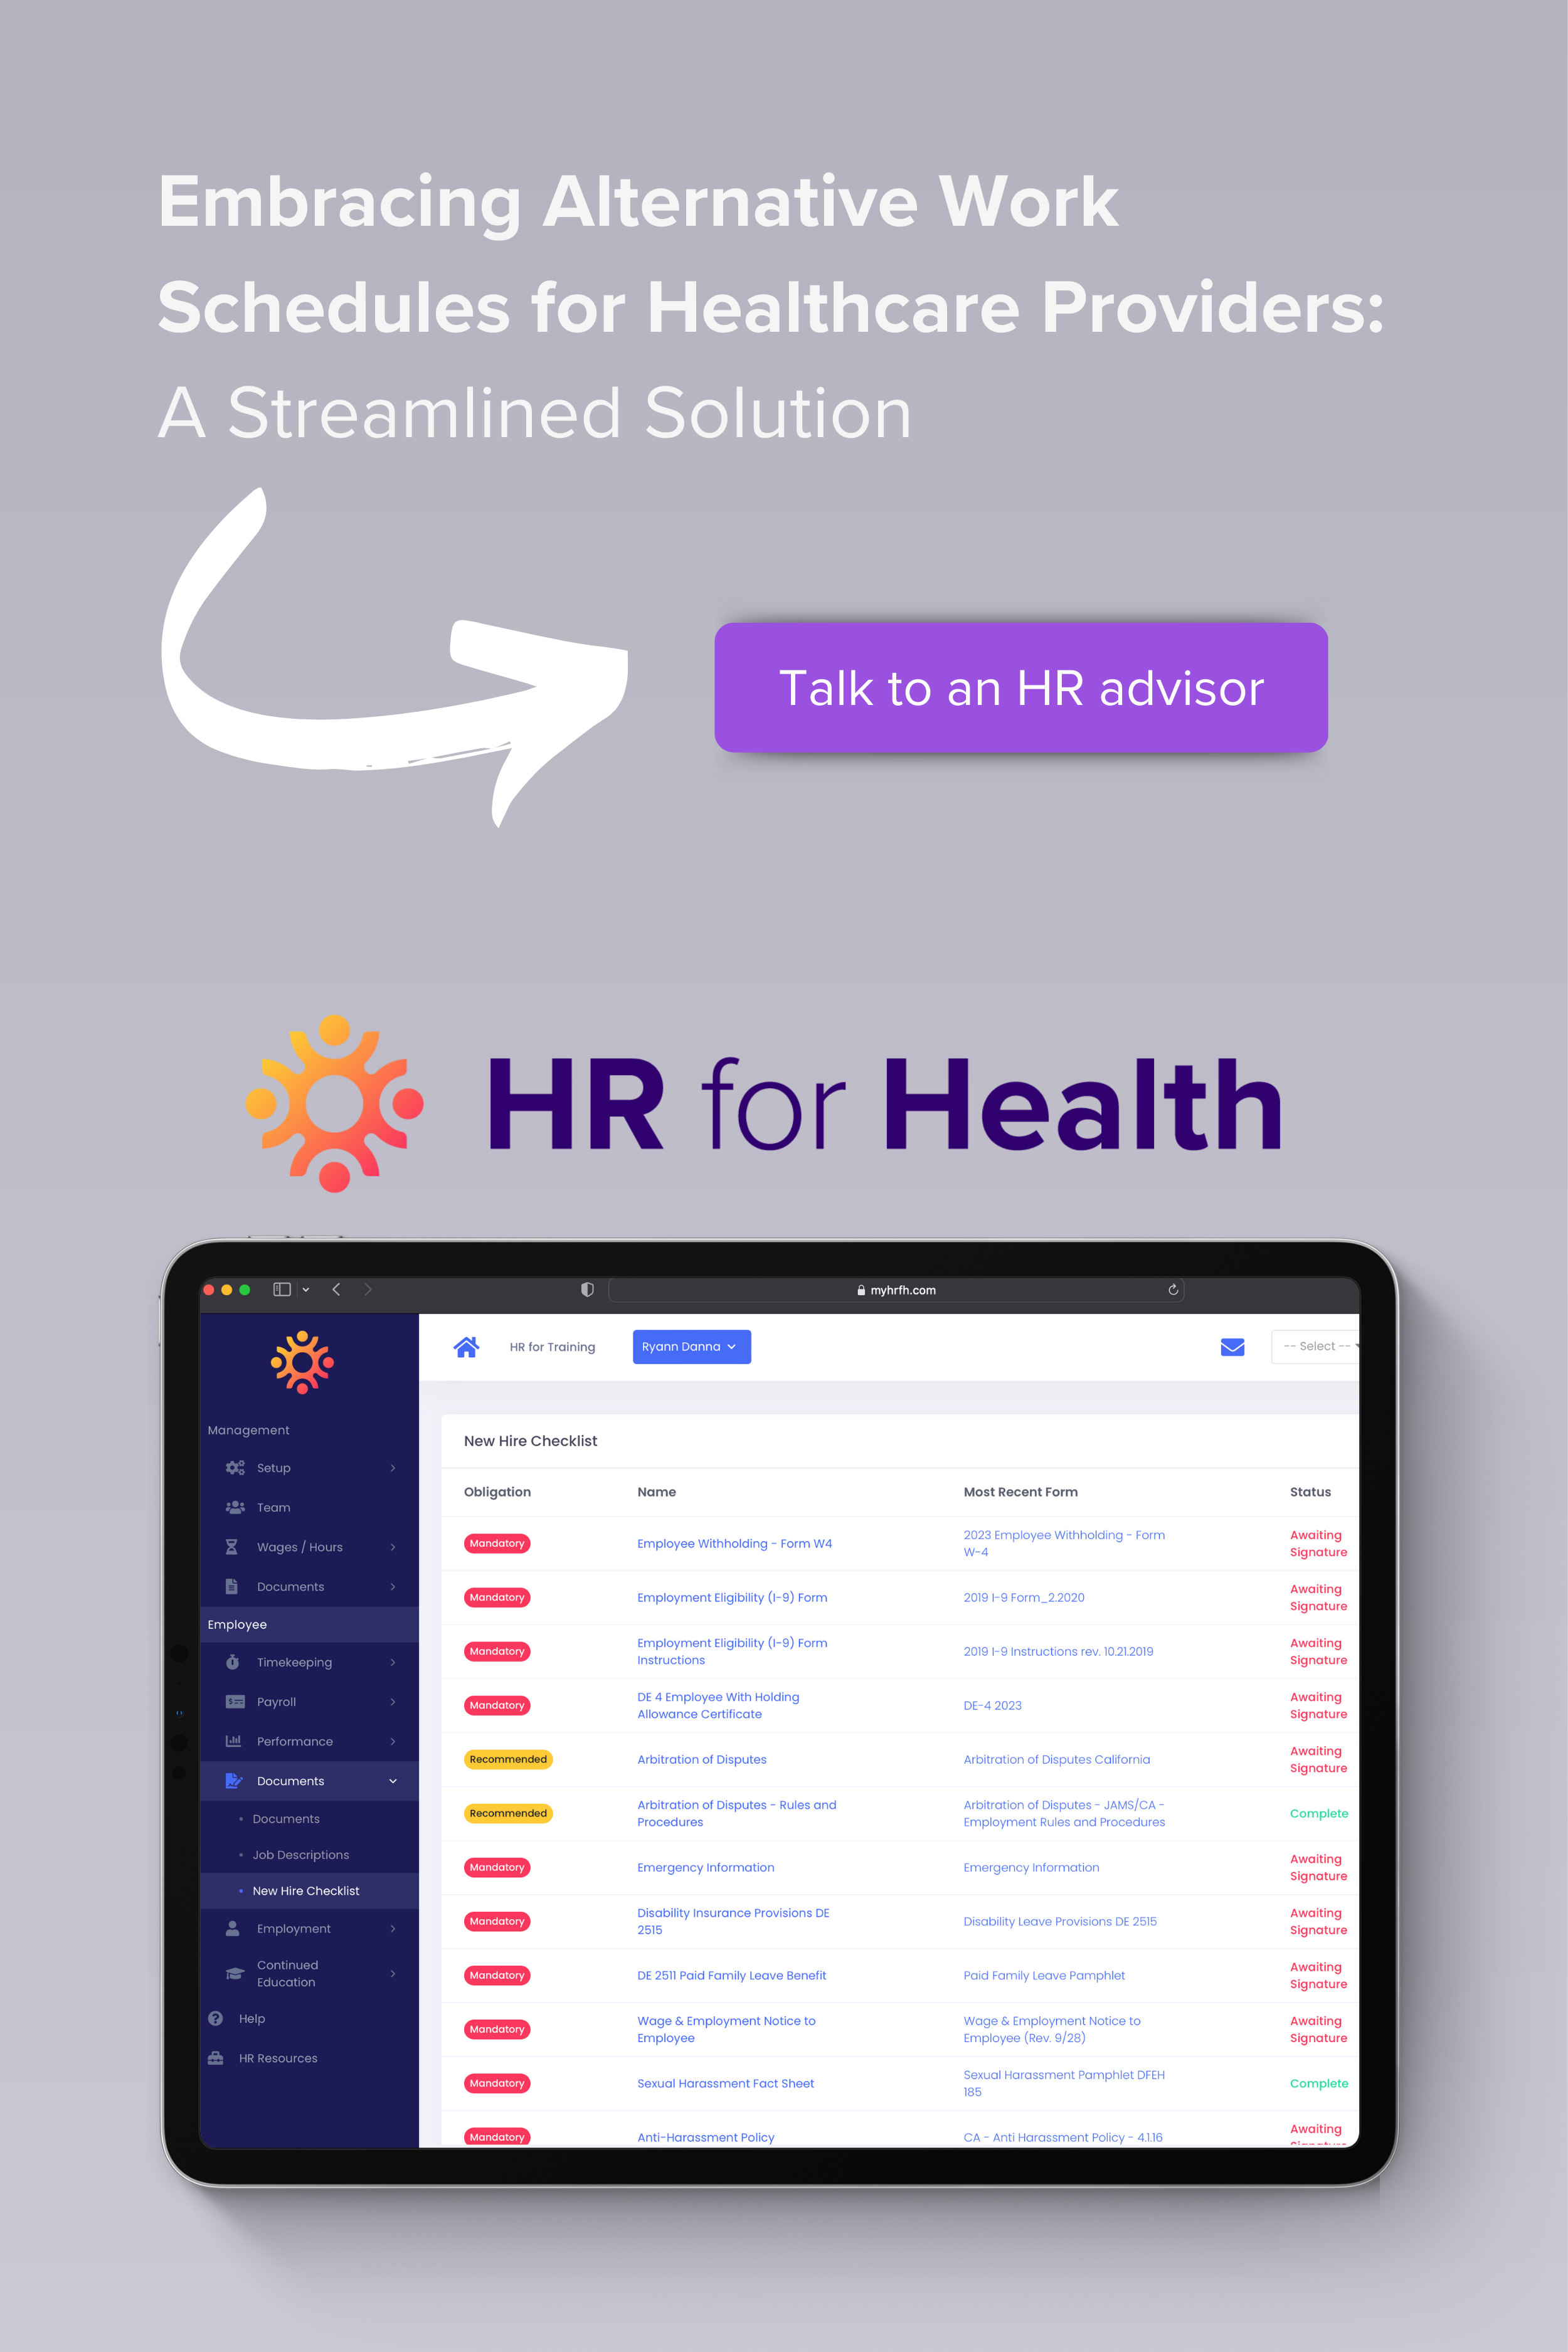 Embracing Alternative Work Schedules for Healthcare Providers A Streamlined Solution